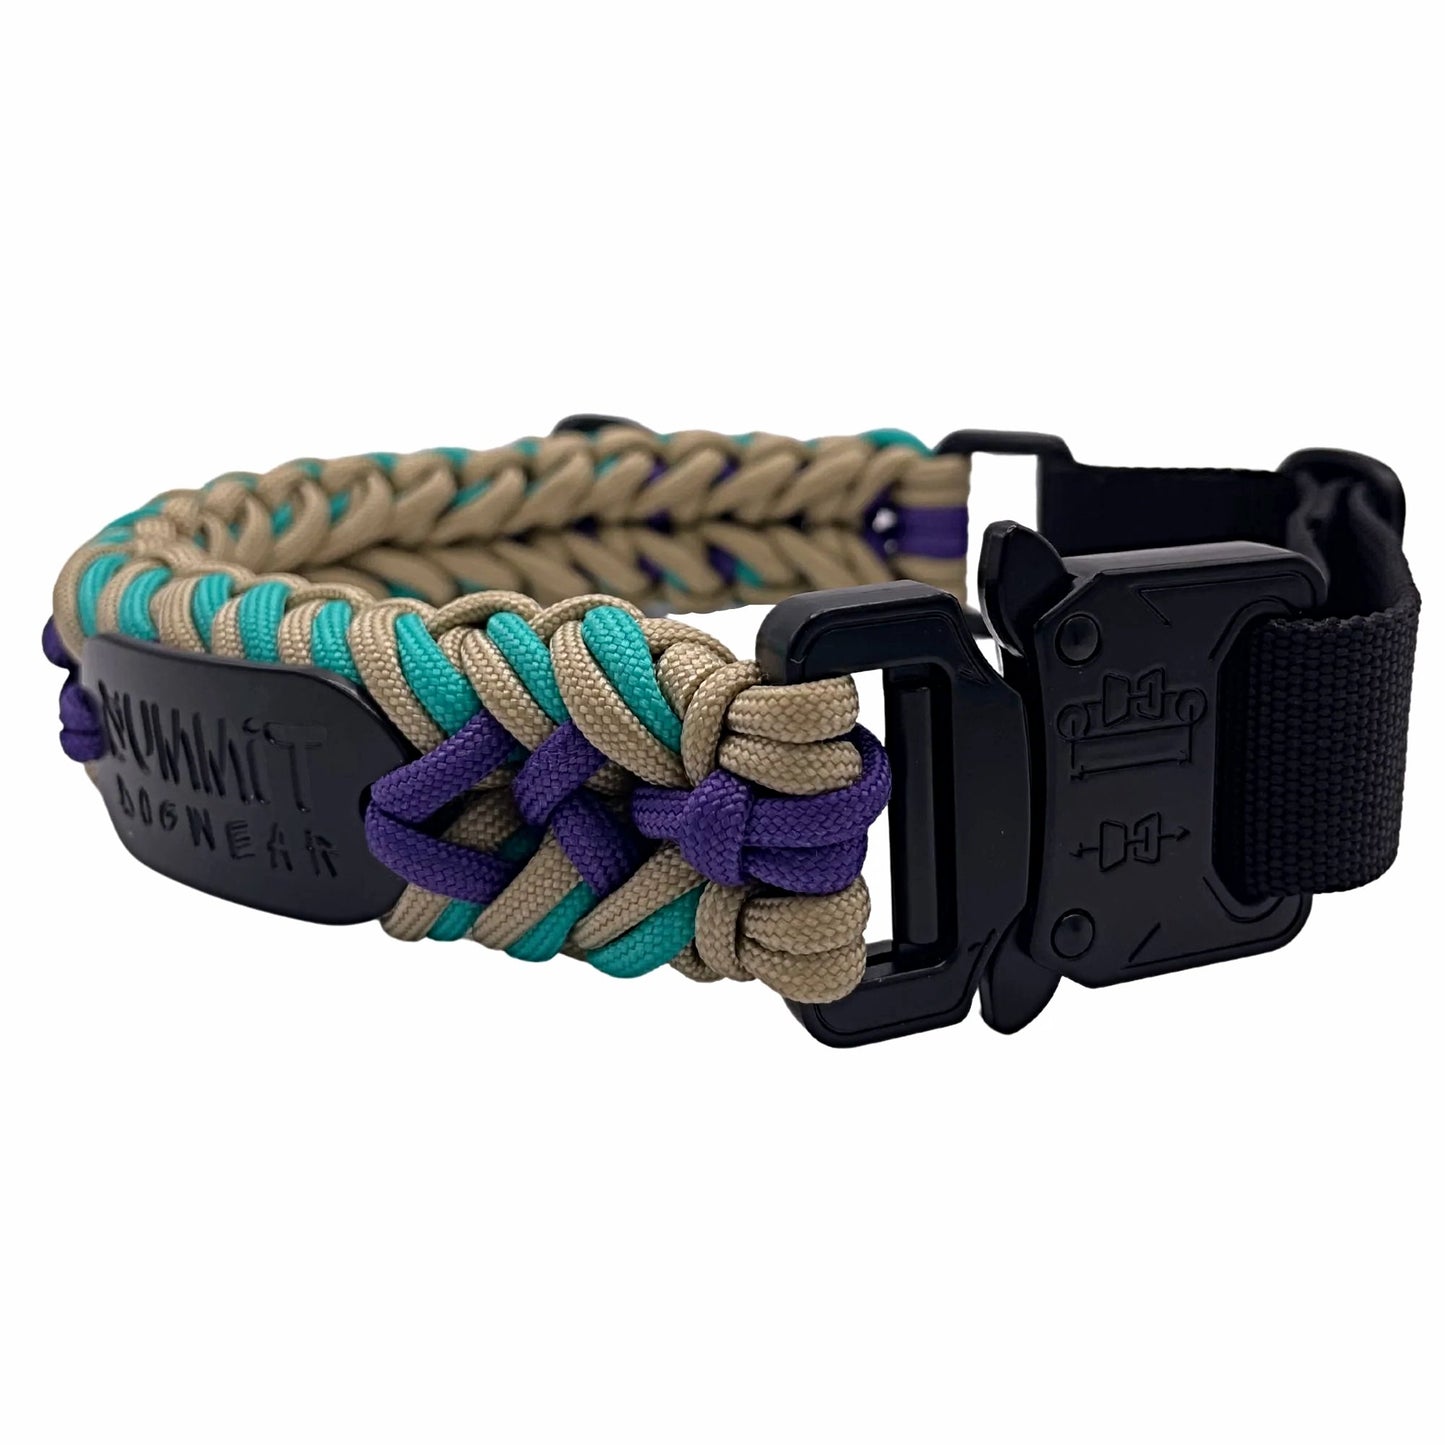 Premium paracord collar with quick-release tactical buckle